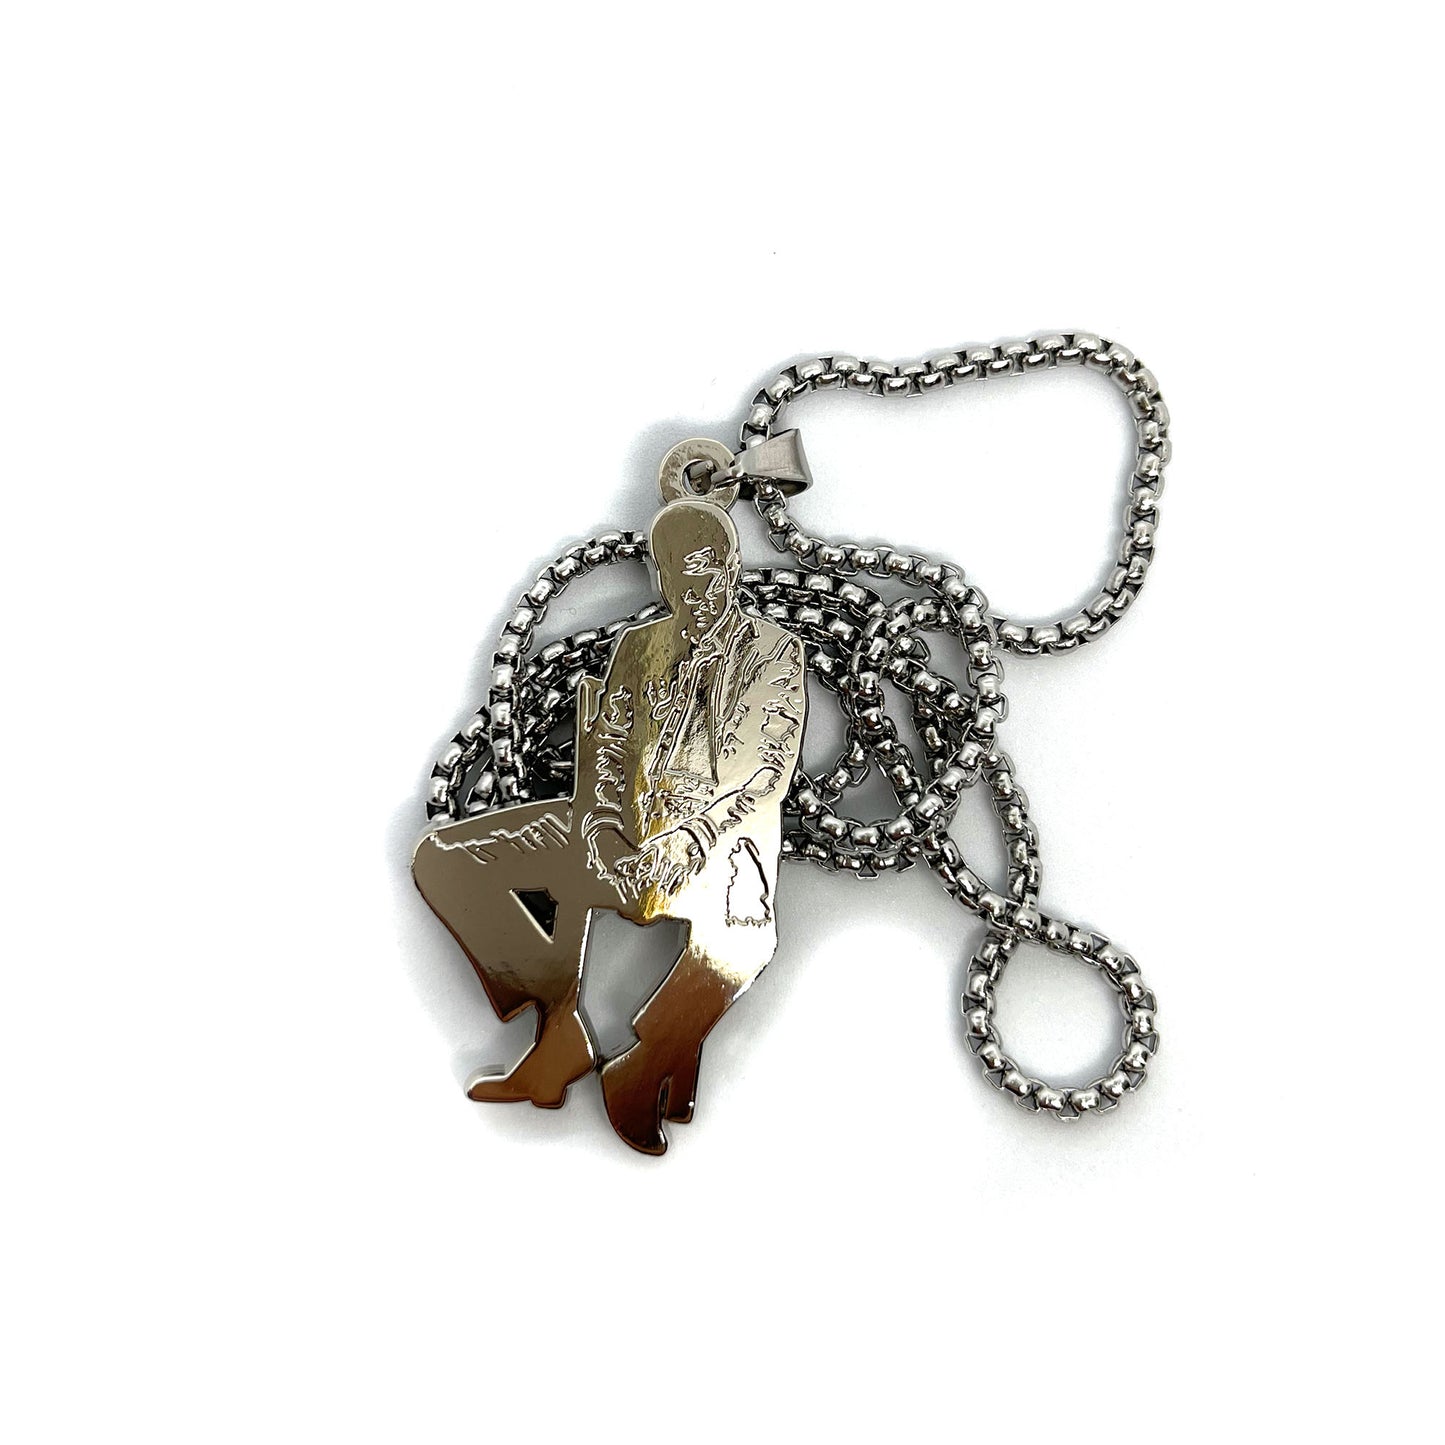 Kid Cudi Fan-Made "Man on the Moon: Mr. Rager" Pendant Chain Necklace – 60cm Stainless Steel Chain